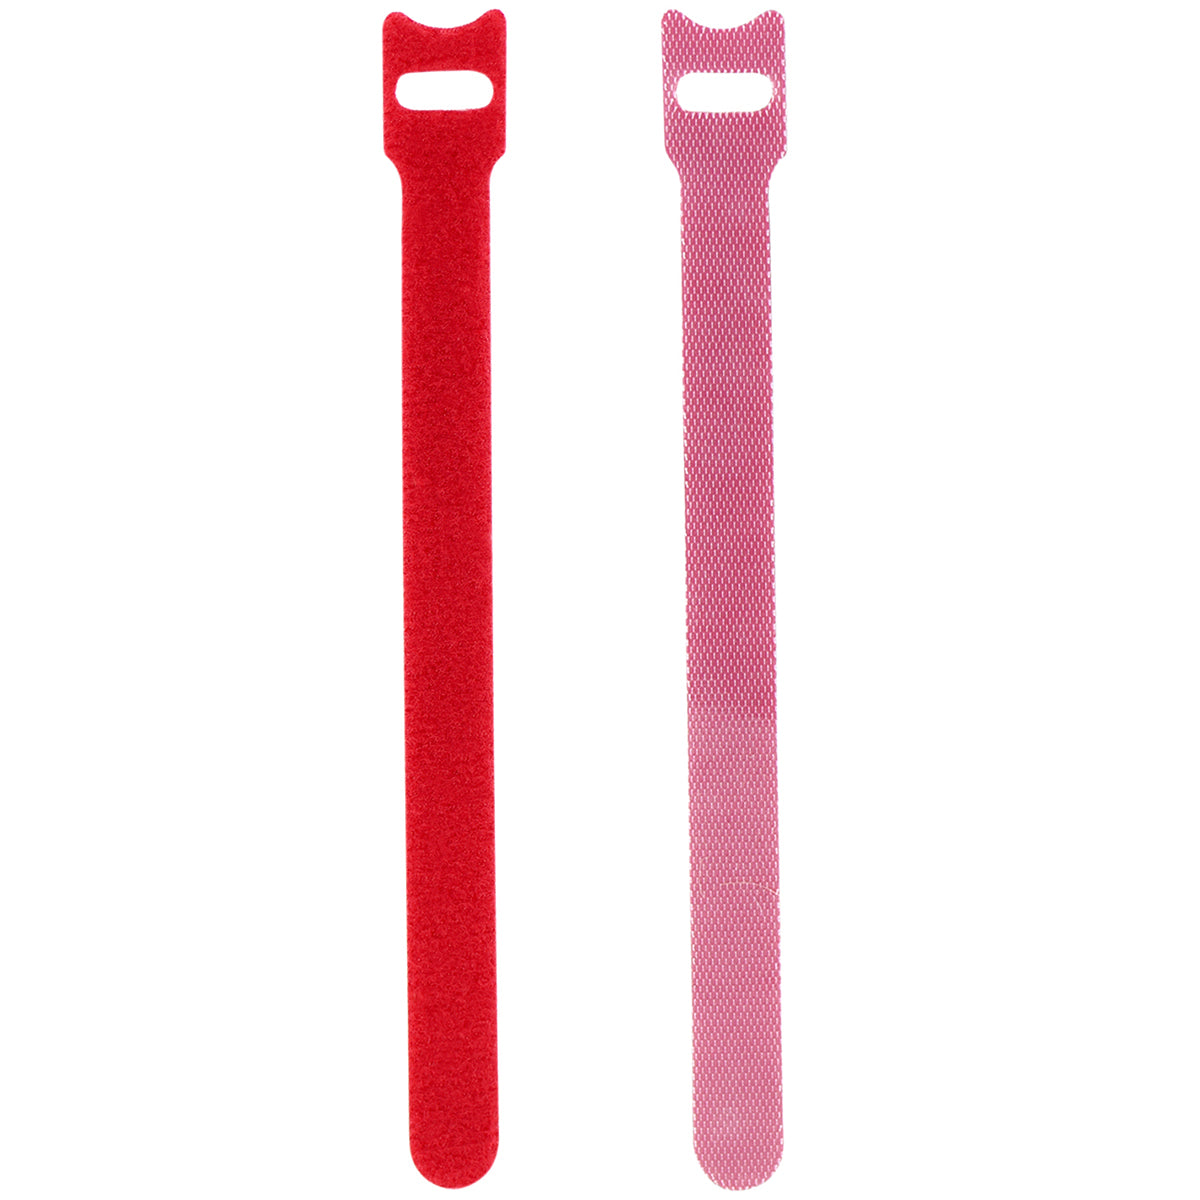 Displaying of two upright red nylon cable ties  